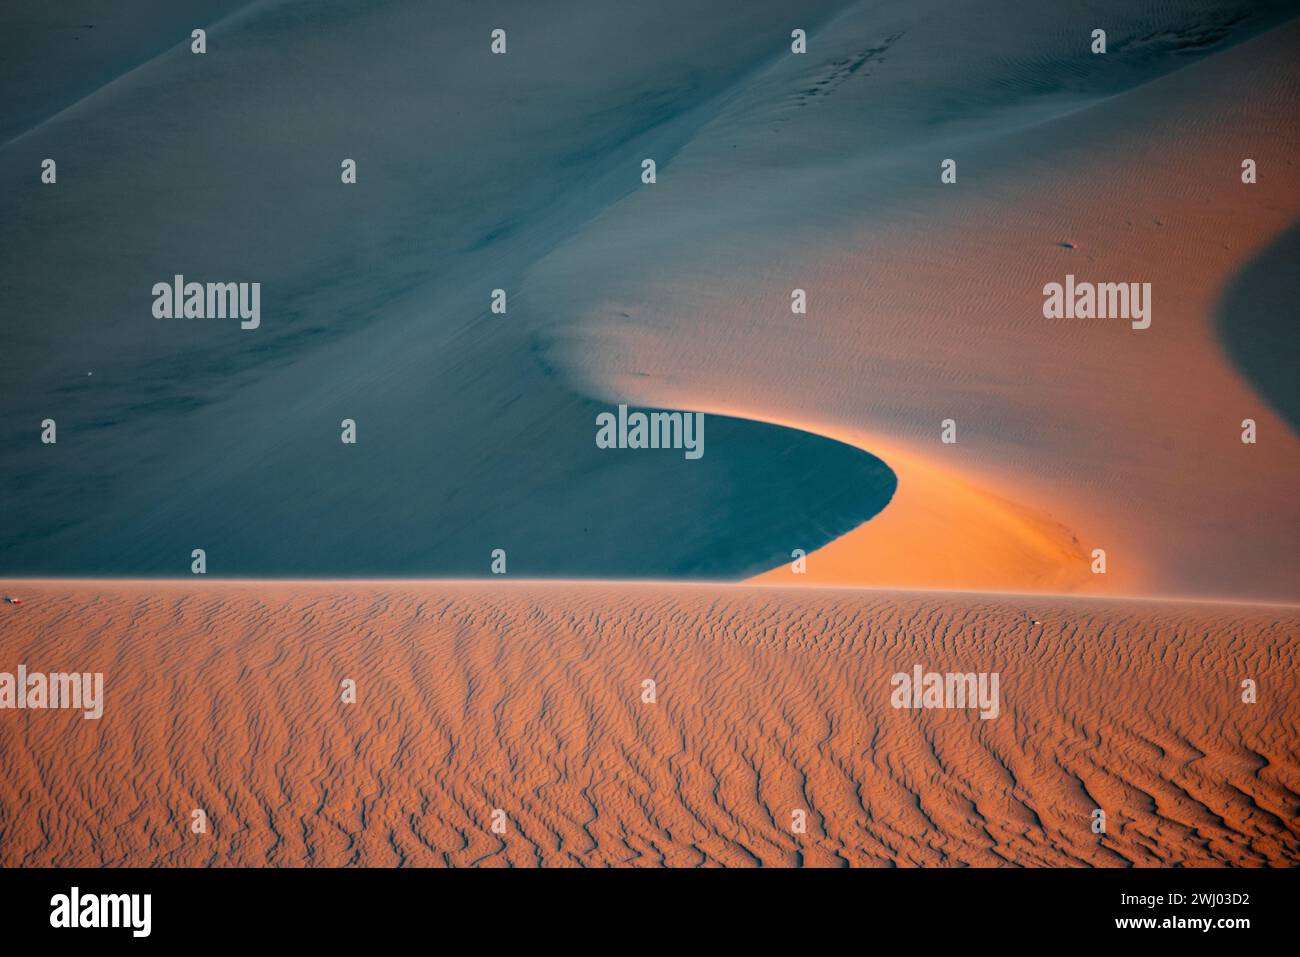 Dumont Sand Dunes, Inyo County California, Death Valley National Park, Sand Dunes, Sunset, Sand Dune Contours Stock Photo